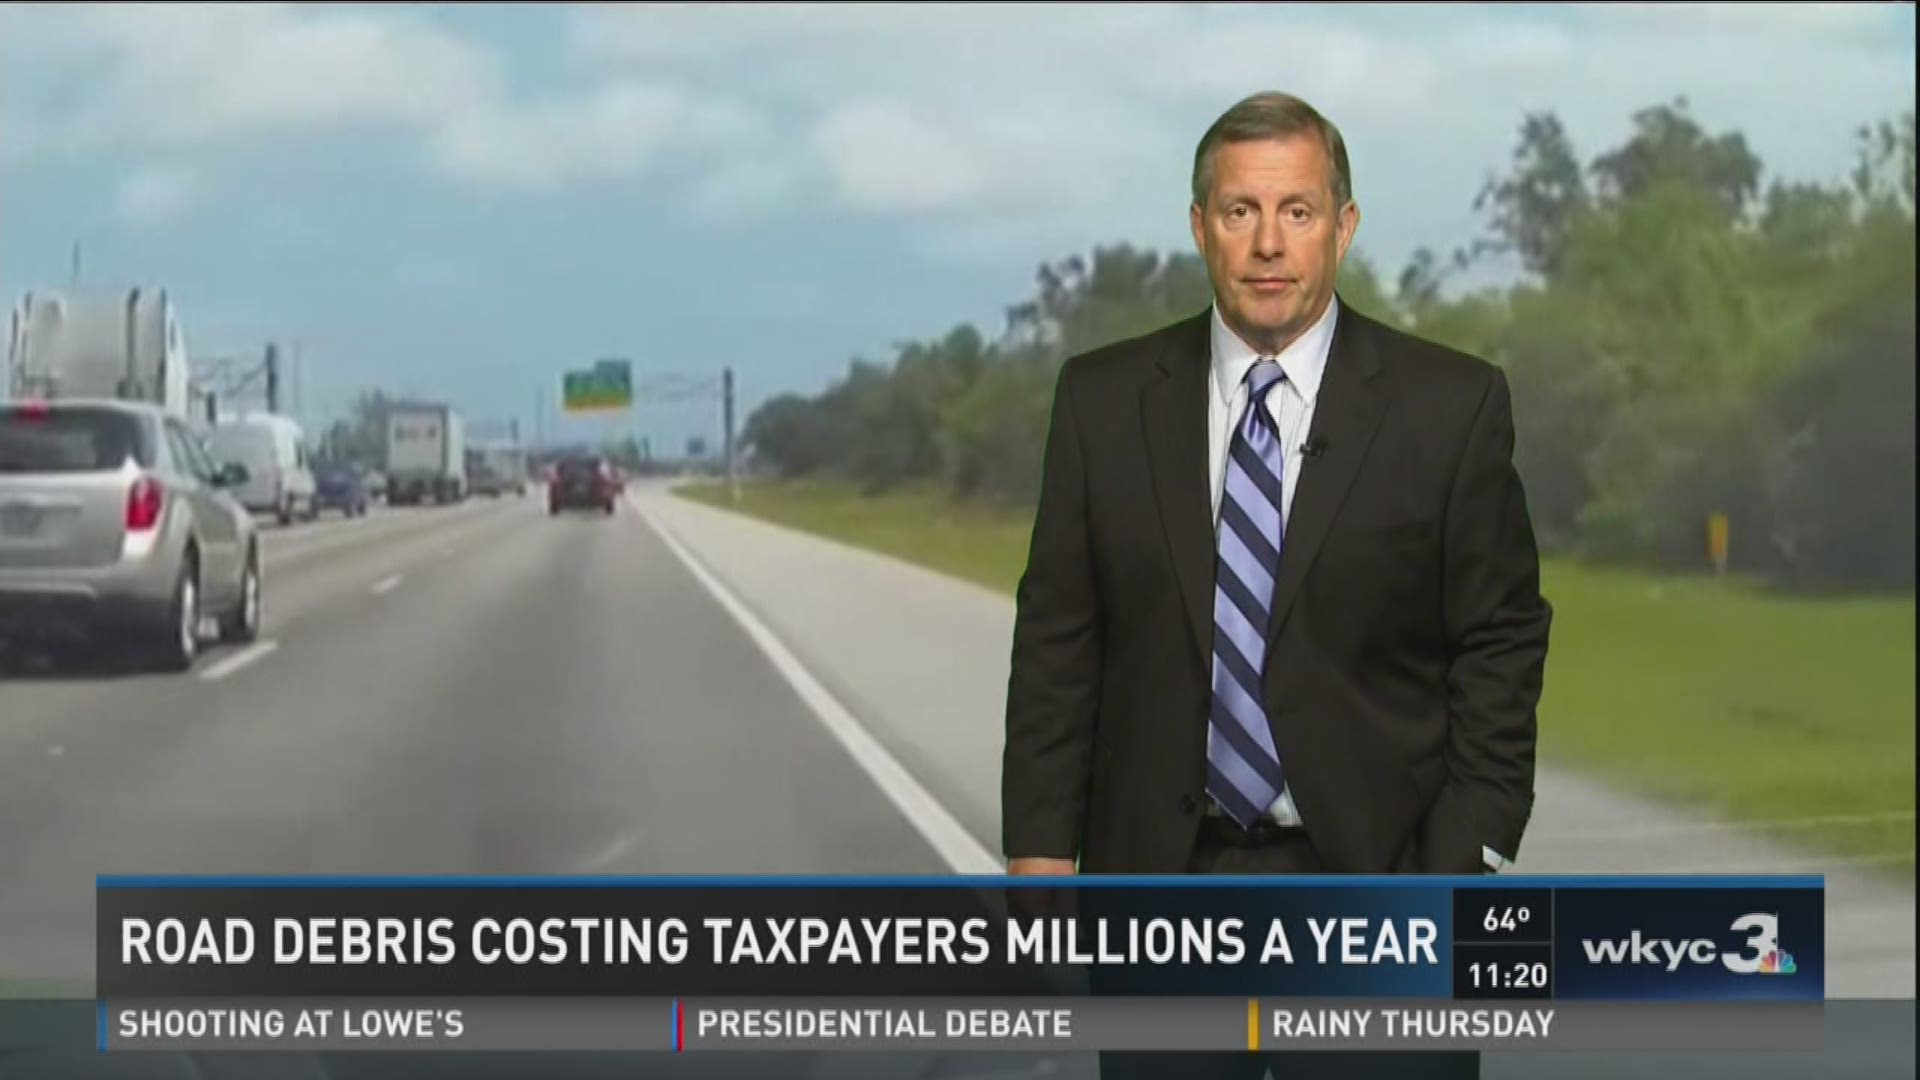 Road debris costing taxpayers millions a year